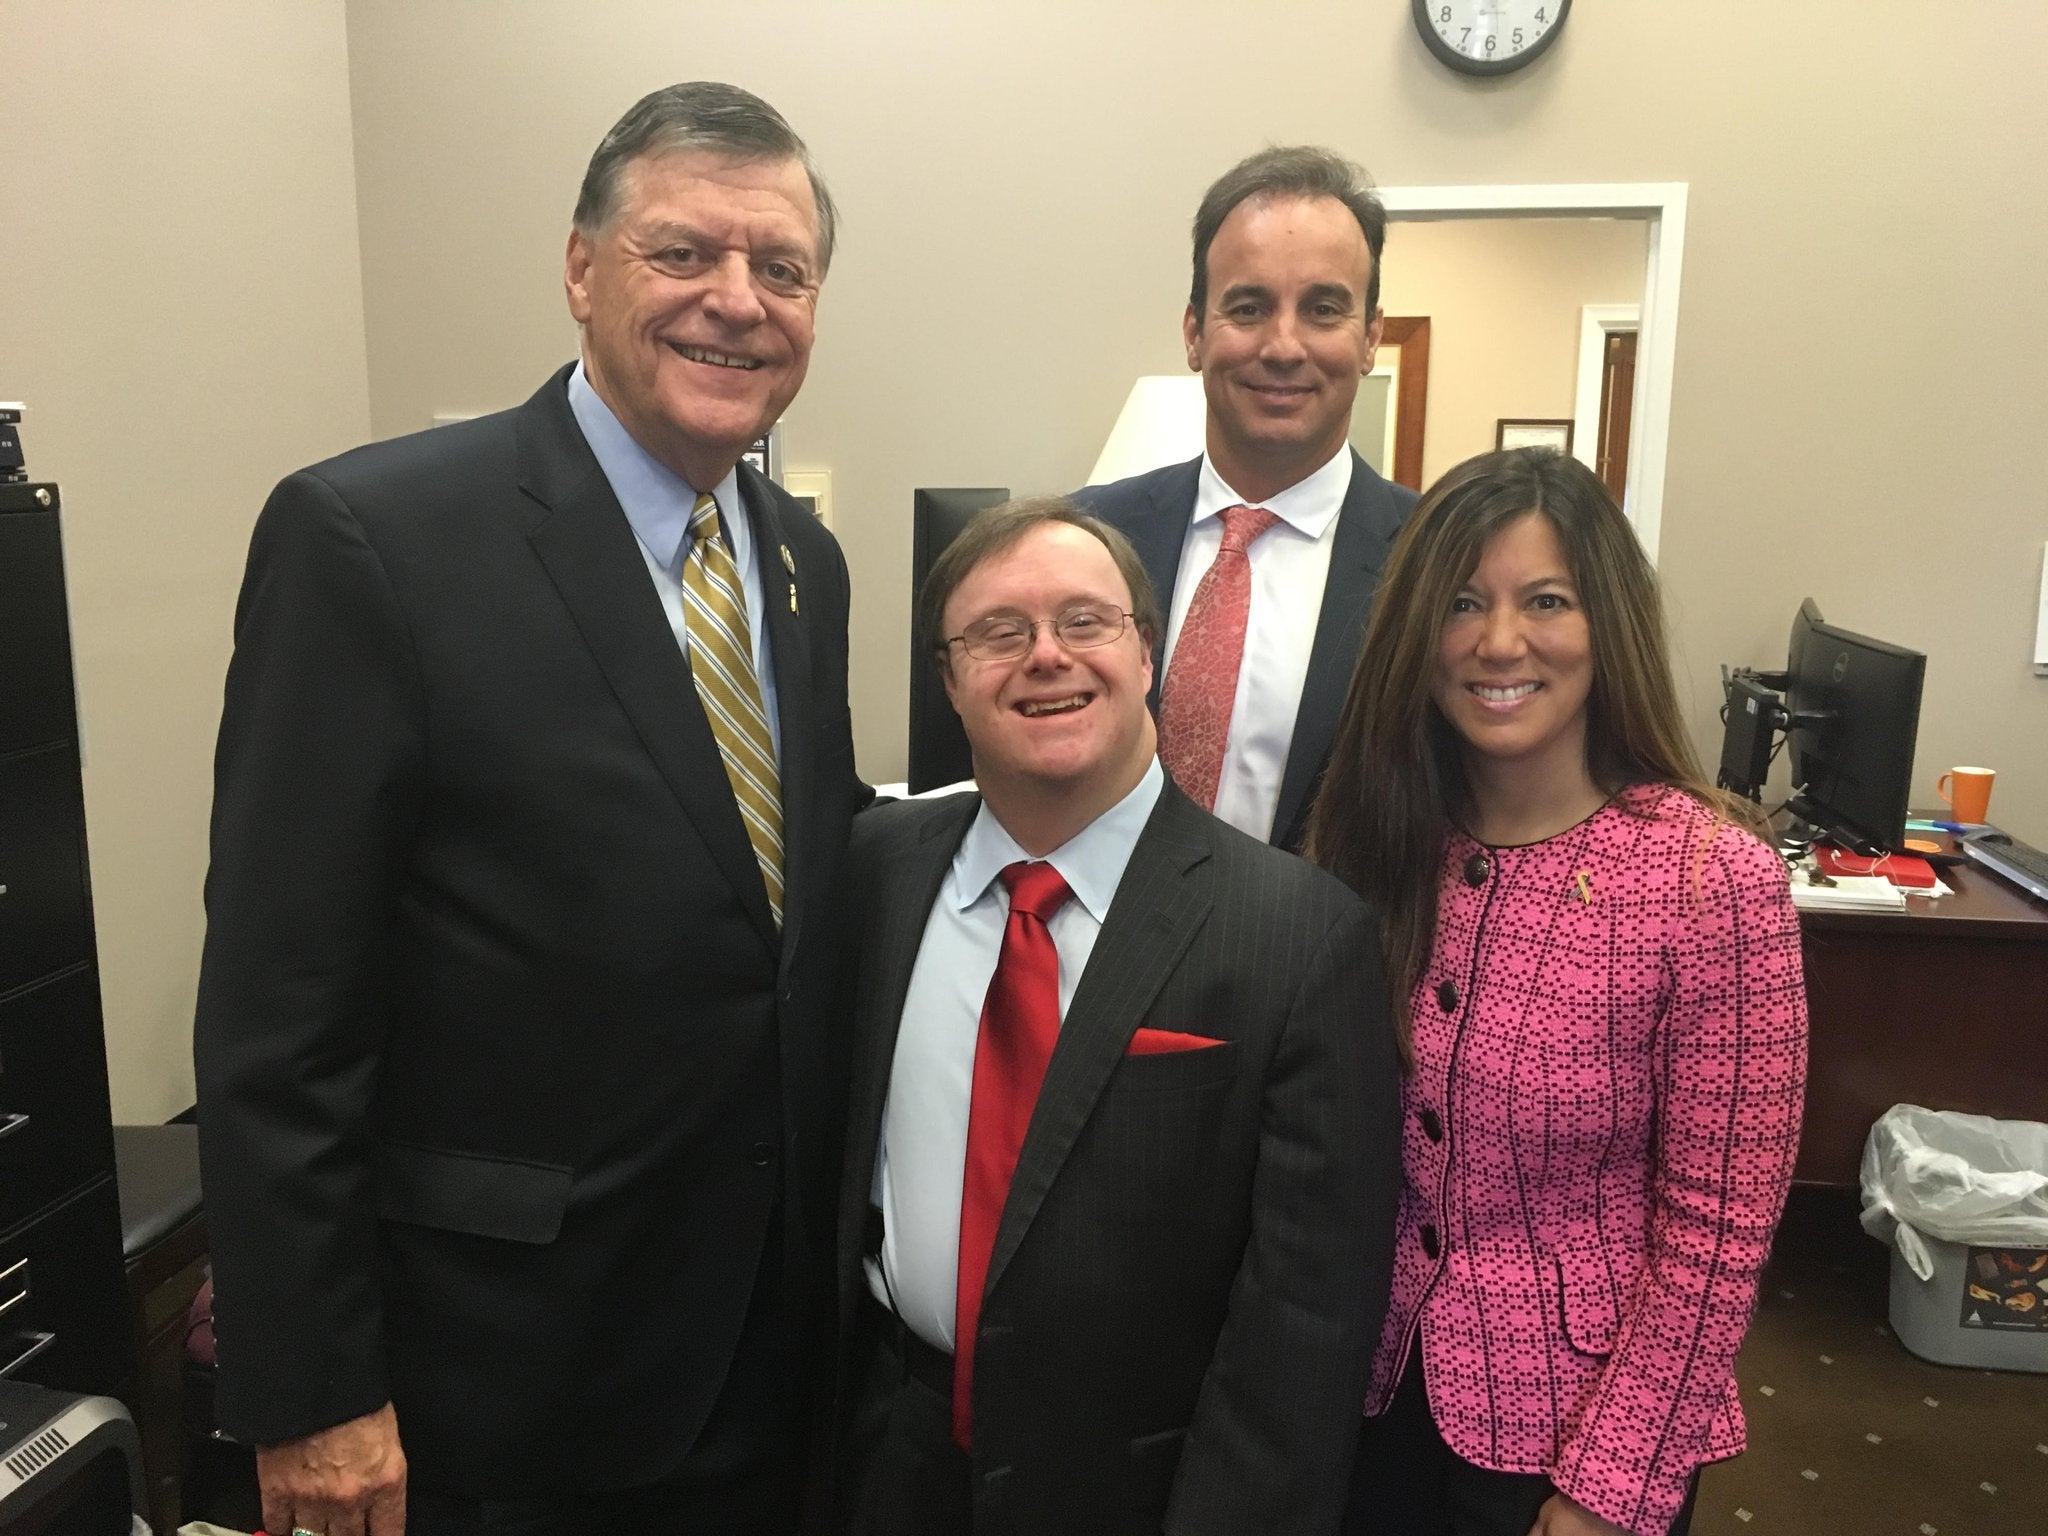 House Labor-HHS-Education Appropriations Subcommittee Chairman Tom Cole, Down Syndrome self-advocate Frank Stephens, CU Anschutz’s Dr. Joaquin Espinosa, and Global Down Syndrome Foundation President Michelle Sie Whitten